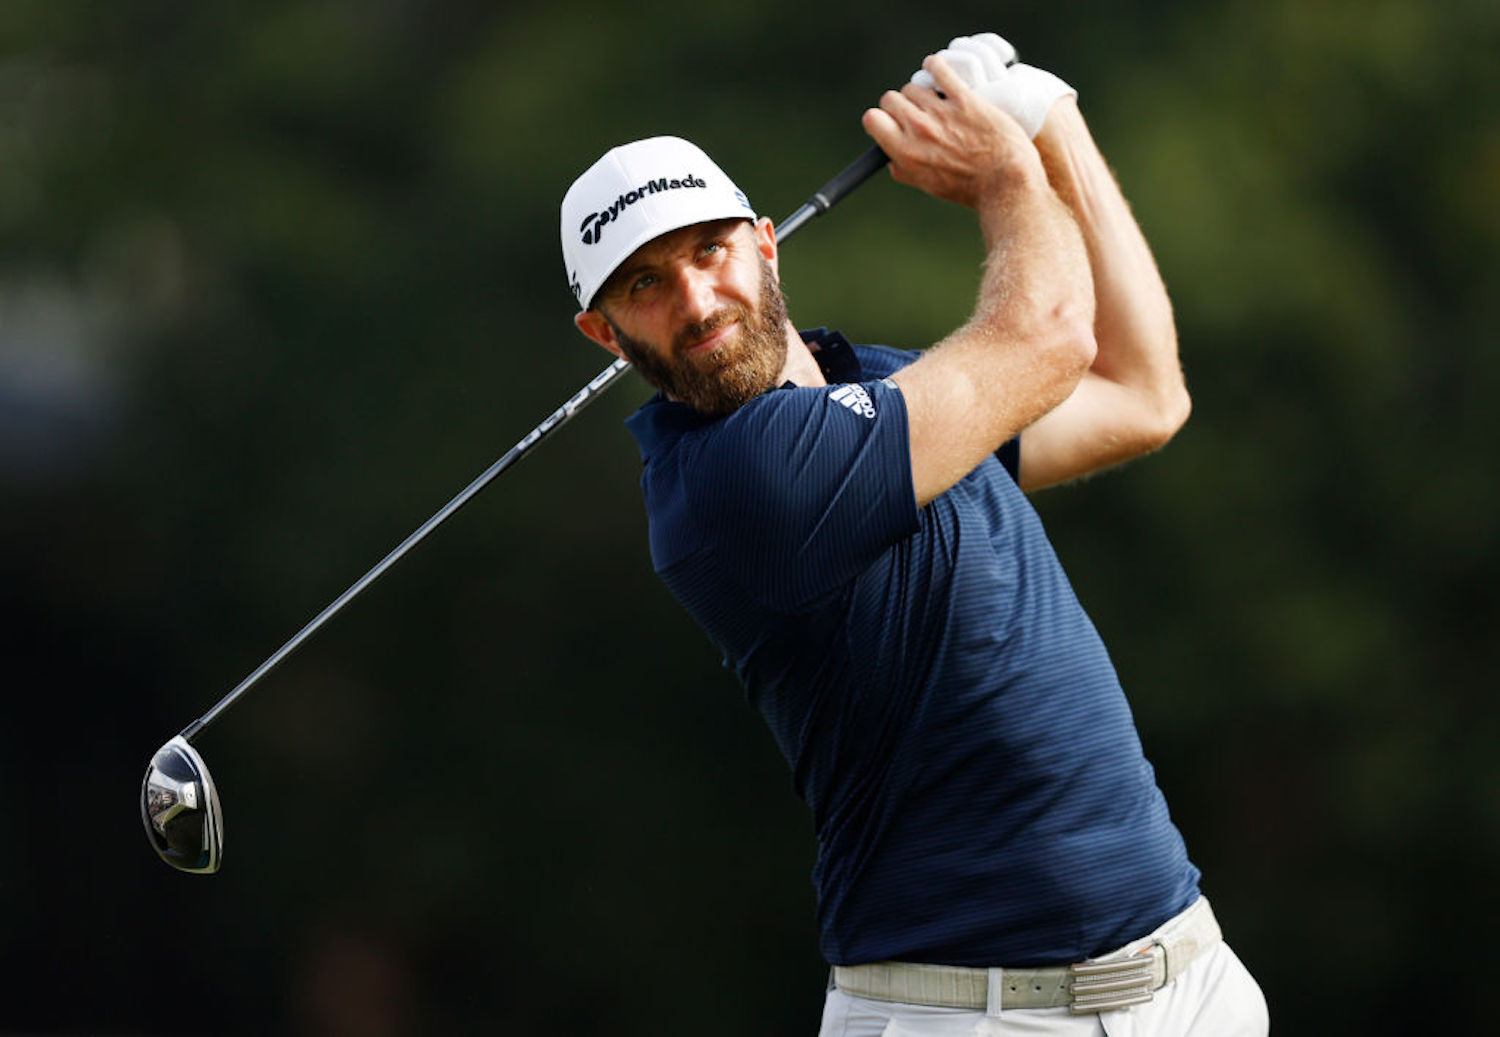 Dustin Johnson Just Sent a Terrifying Message to the Rest of the PGA Tour Ahead of The Masters